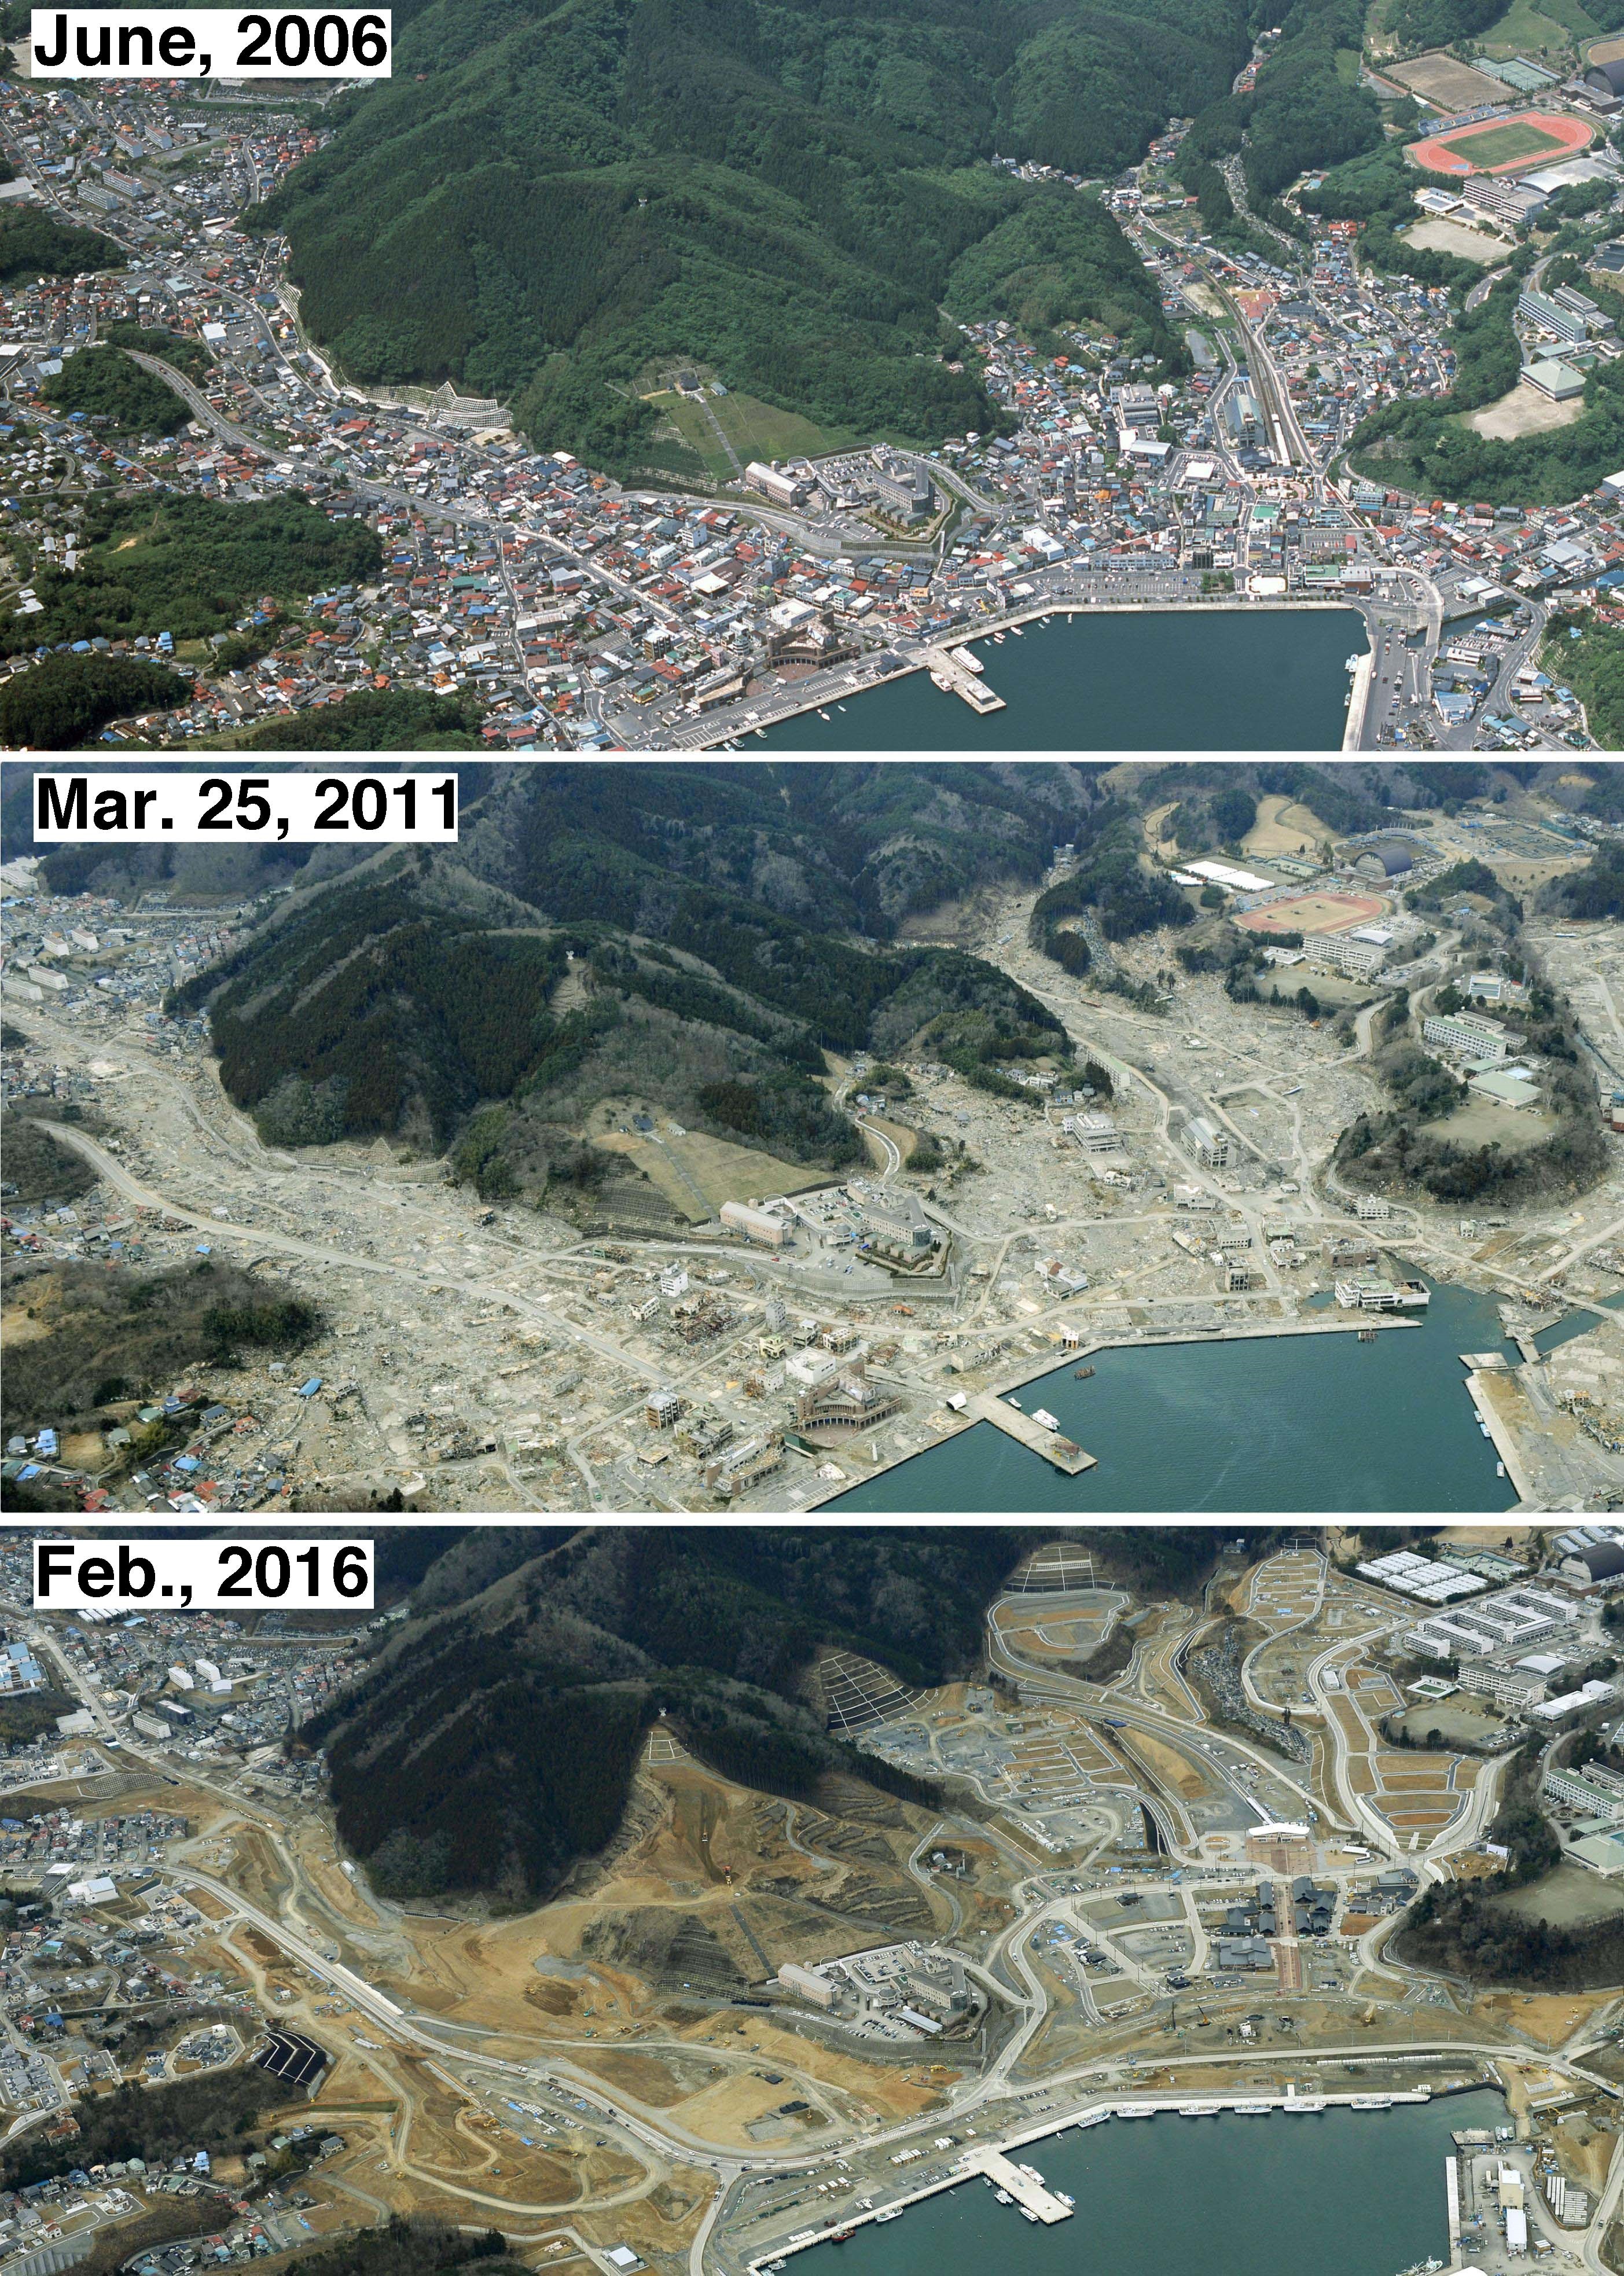 Onagawa before, right after, and 5 years after the event.